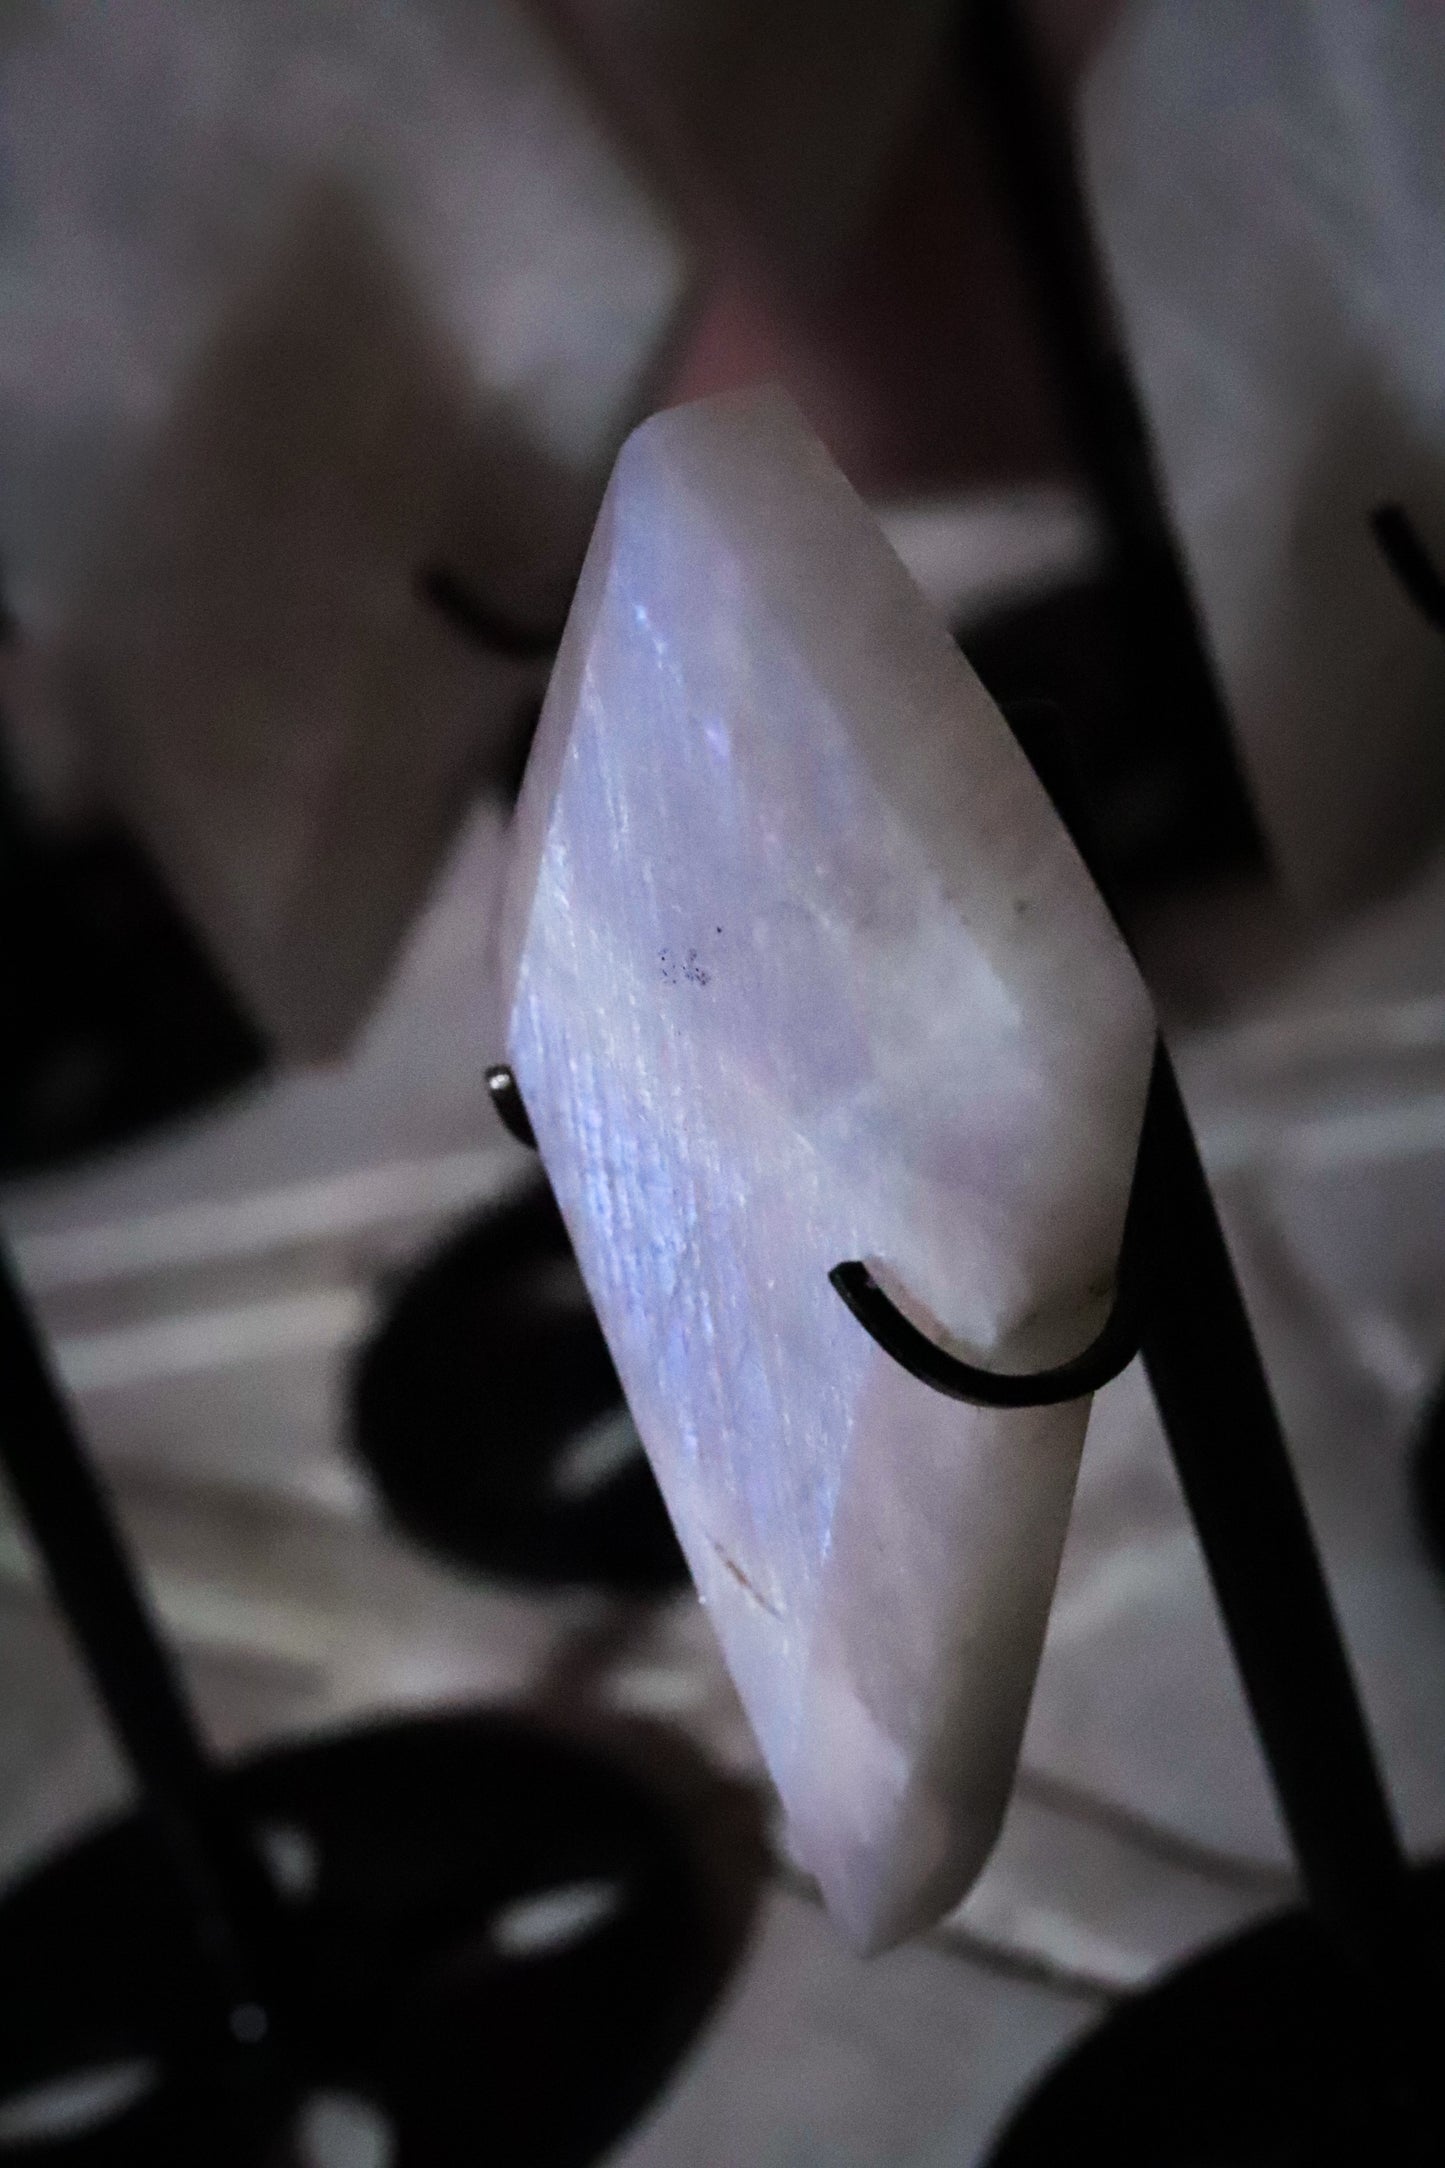 Moonstone carved diamond shape with a stand